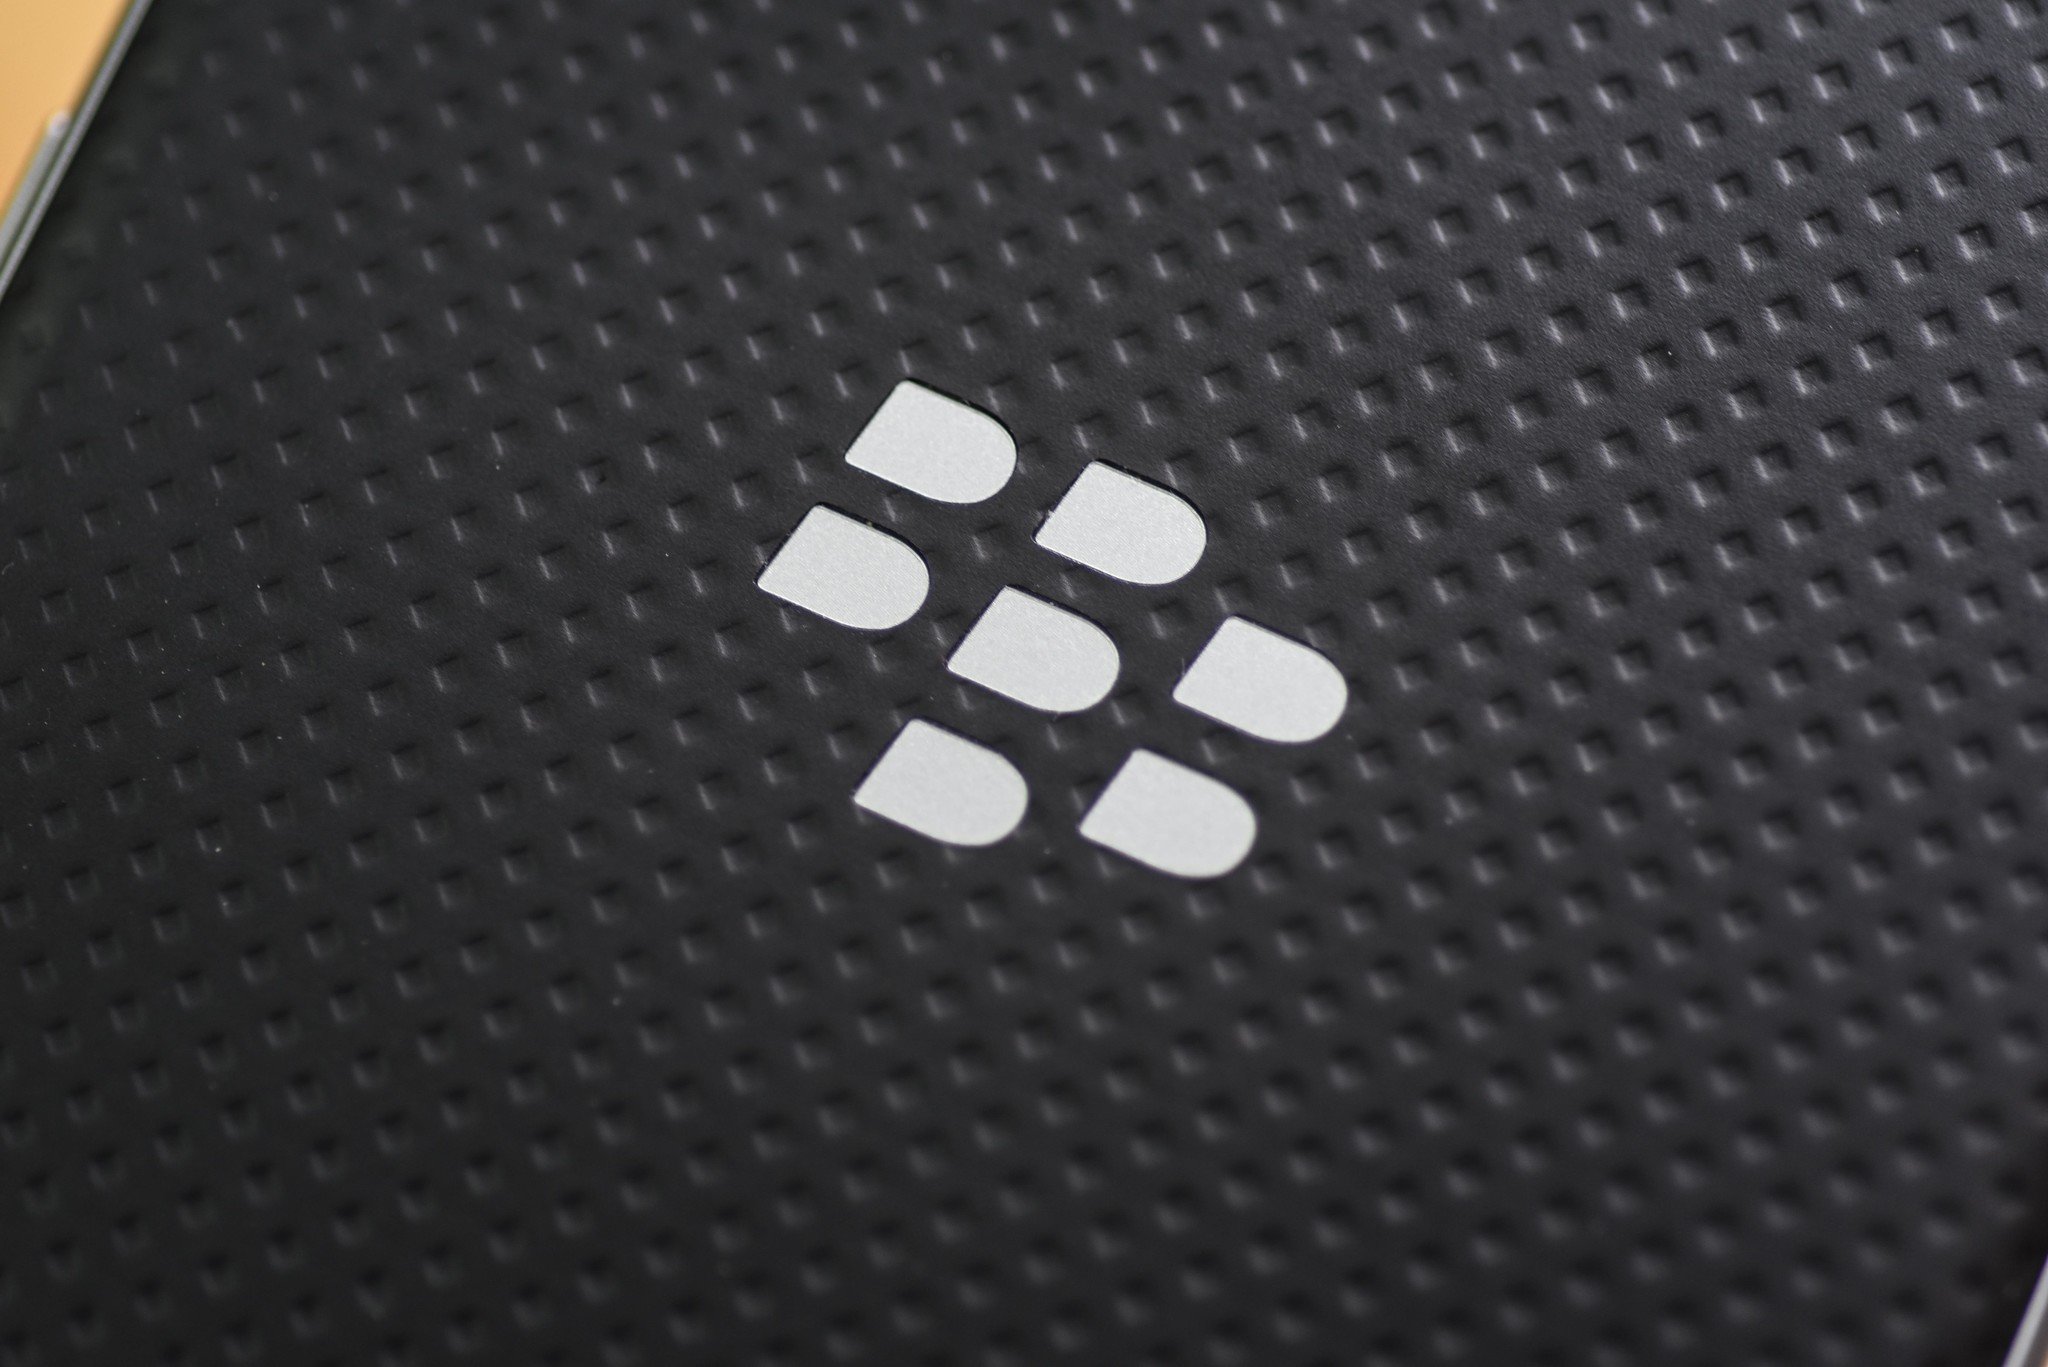 With OnwardMobility shutting down, BlackBerry’s revival is officially over